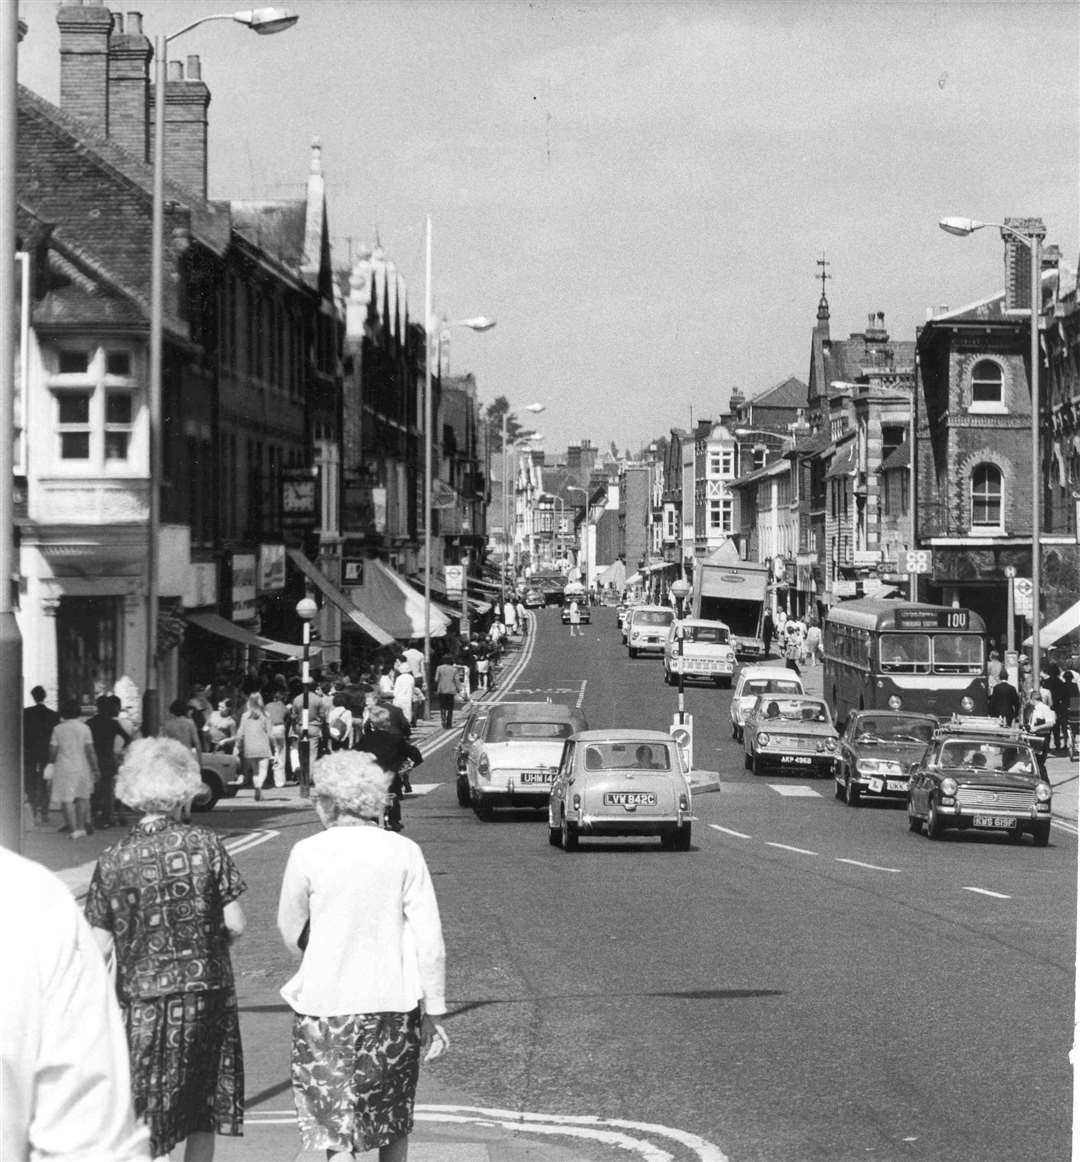 Tonbridge High Street, pictured in July 1971